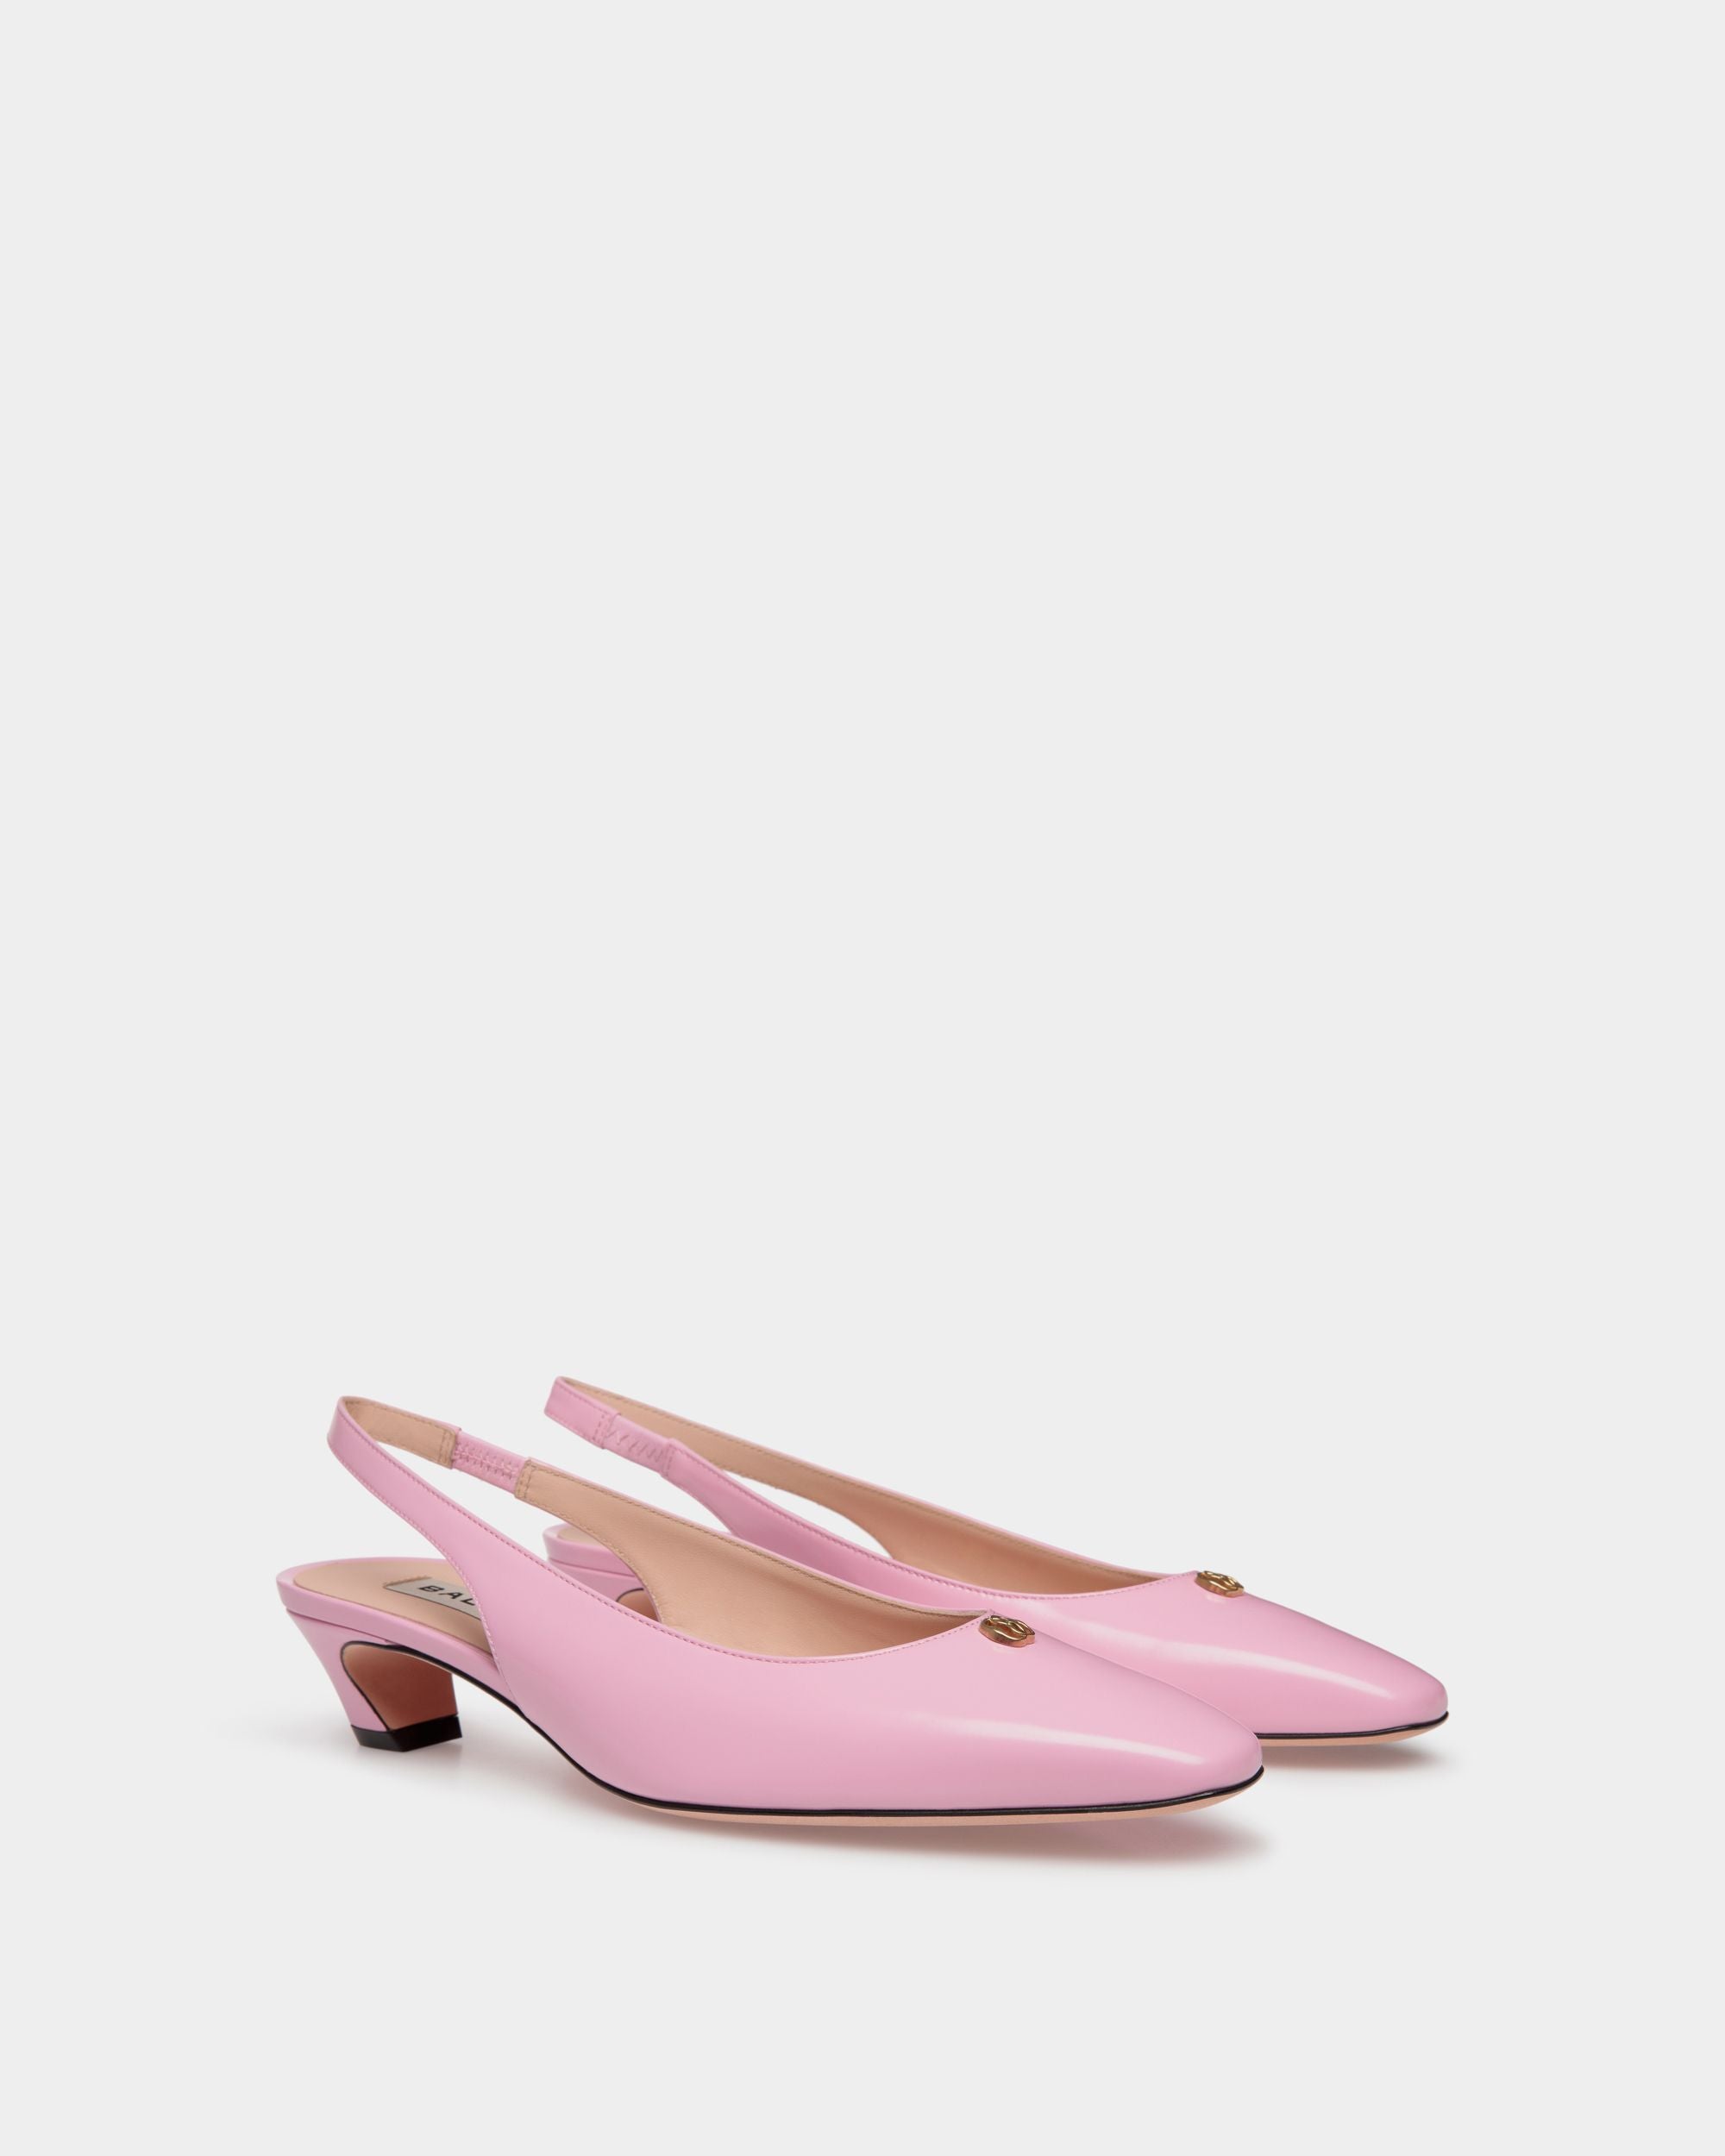 Sylt | Women's Slingback Pump in Pink Leather | Bally | Still Life 3/4 Front